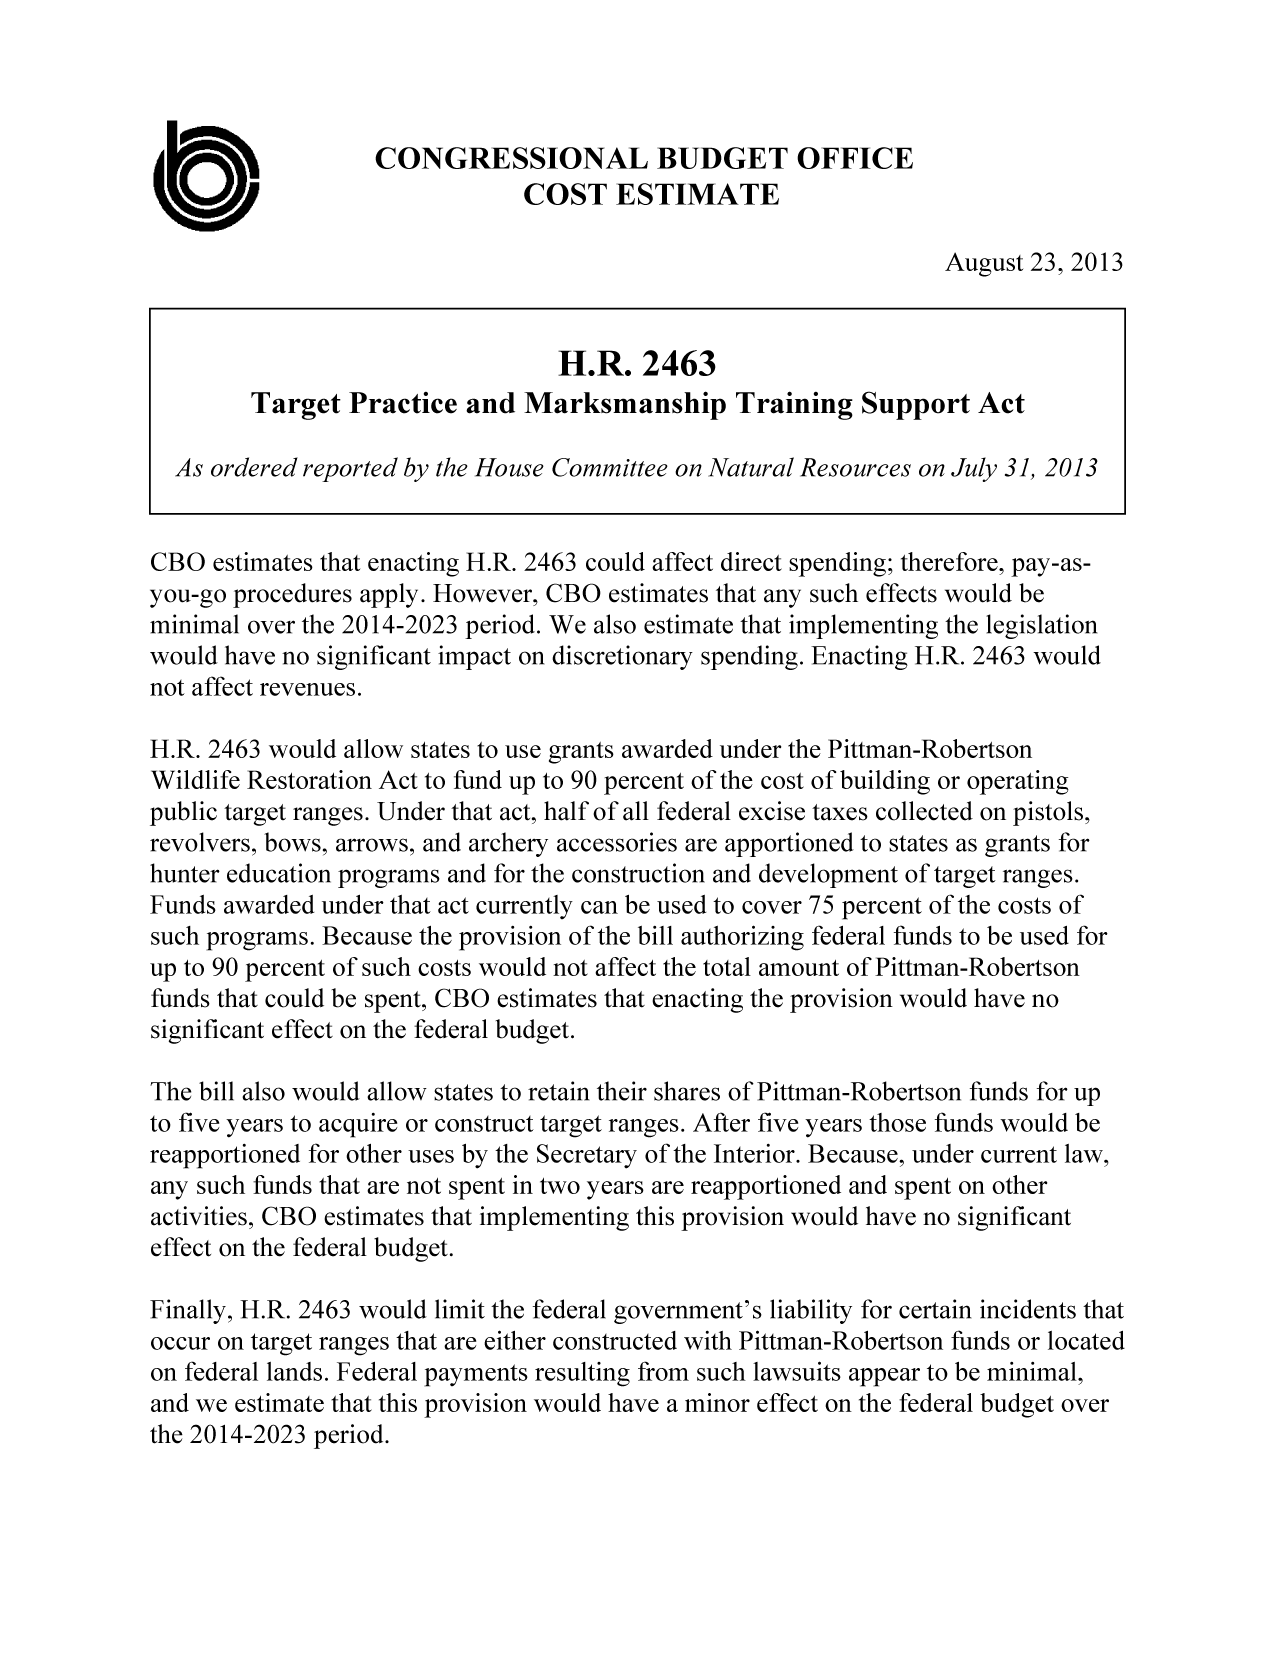 handle is hein.congrec/cbo11246 and id is 1 raw text is: CONGRESSIONAL BUDGET OFFICE
COST ESTIMATE
August 23, 2013
H.R. 2463
Target Practice and Marksmanship Training Support Act
As ordered reported by the House Committee on Natural Resources on July 3], 2013
CBO estimates that enacting H.R. 2463 could affect direct spending; therefore, pay-as-
you-go procedures apply. However, CBO estimates that any such effects would be
minimal over the 2014-2023 period. We also estimate that implementing the legislation
would have no significant impact on discretionary spending. Enacting H.R. 2463 would
not affect revenues.
H.R. 2463 would allow states to use grants awarded under the Pittman-Robertson
Wildlife Restoration Act to fund up to 90 percent of the cost of building or operating
public target ranges. Under that act, half of all federal excise taxes collected on pistols,
revolvers, bows, arrows, and archery accessories are apportioned to states as grants for
hunter education programs and for the construction and development of target ranges.
Funds awarded under that act currently can be used to cover 75 percent of the costs of
such programs. Because the provision of the bill authorizing federal funds to be used for
up to 90 percent of such costs would not affect the total amount of Pittman-Robertson
funds that could be spent, CBO estimates that enacting the provision would have no
significant effect on the federal budget.
The bill also would allow states to retain their shares of Pittman-Robertson funds for up
to five years to acquire or construct target ranges. After five years those funds would be
reapportioned for other uses by the Secretary of the Interior. Because, under current law,
any such funds that are not spent in two years are reapportioned and spent on other
activities, CBO estimates that implementing this provision would have no significant
effect on the federal budget.
Finally, H.R. 2463 would limit the federal government's liability for certain incidents that
occur on target ranges that are either constructed with Pittman-Robertson funds or located
on federal lands. Federal payments resulting from such lawsuits appear to be minimal,
and we estimate that this provision would have a minor effect on the federal budget over
the 20 14-2023 period.


